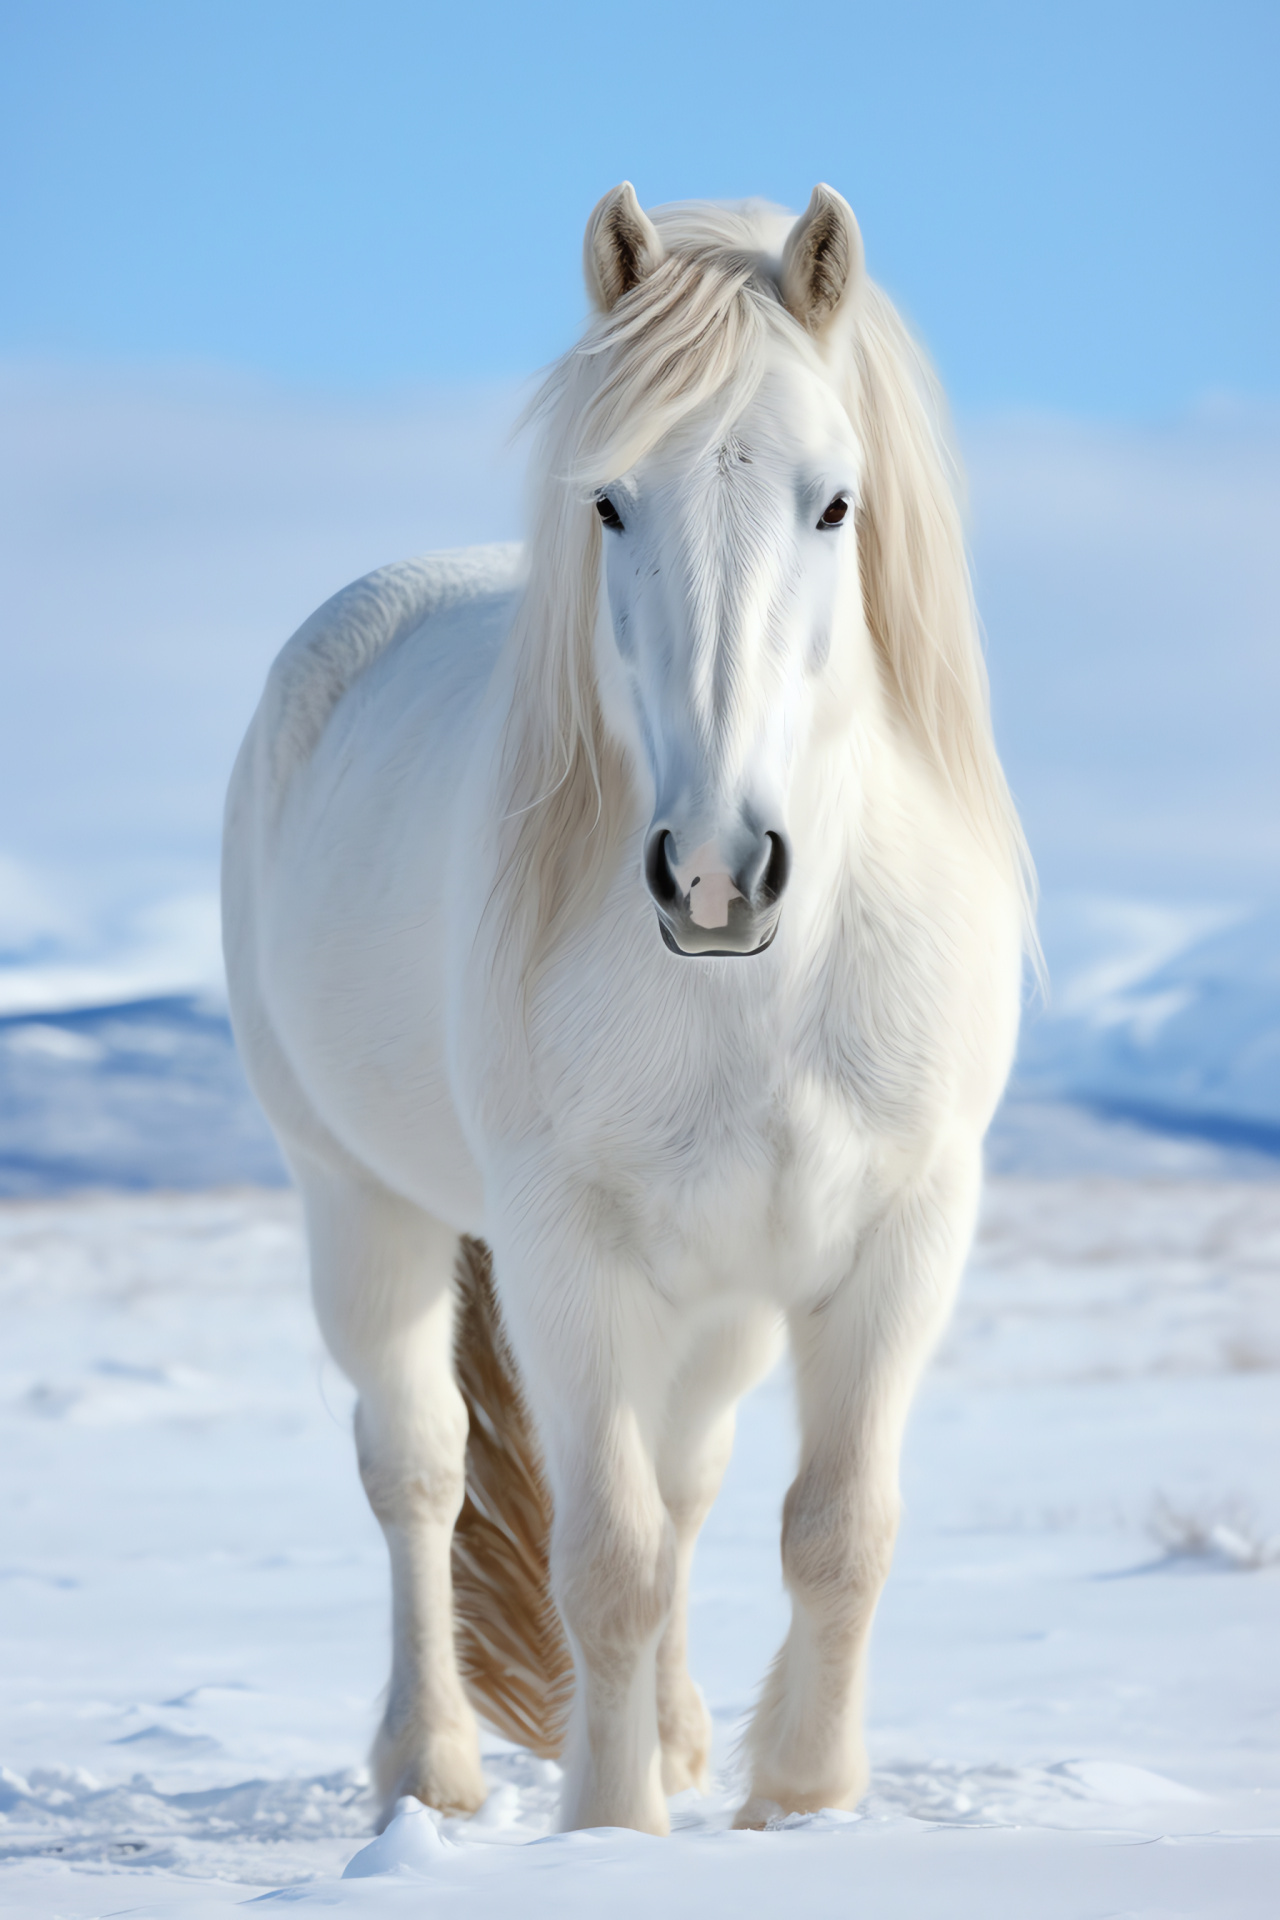 Steed in winter landscape, Equine form in Arctic, Snow-covered equid, Canadian wildlife, Serene animal portrait, HD Phone Wallpaper